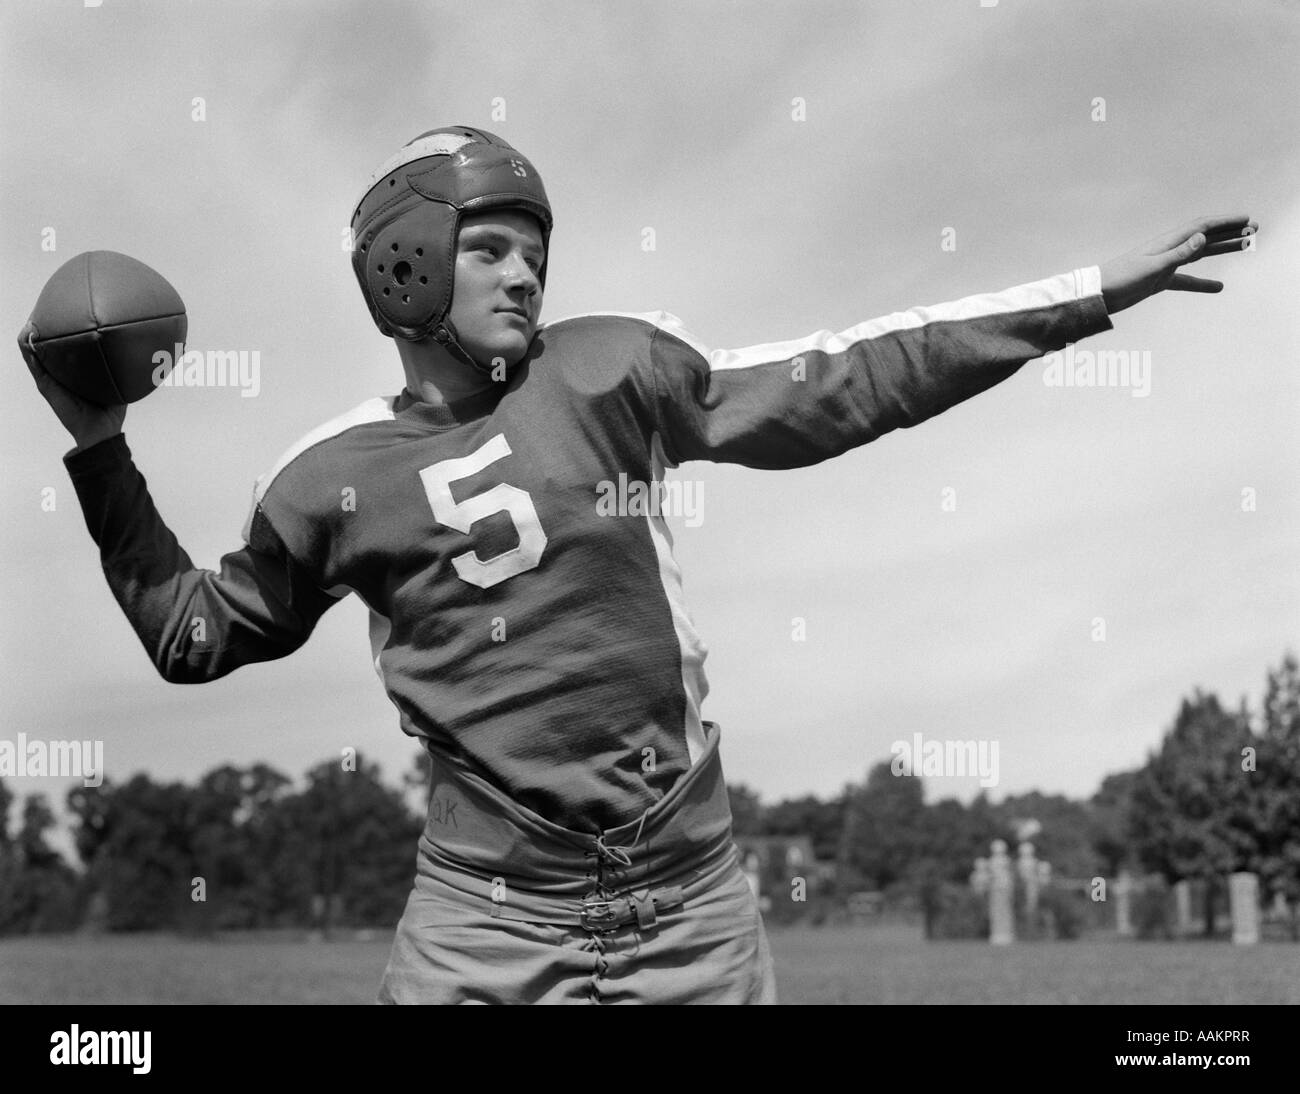 1940s YOUNG TEENAGE QUARTERBACK ABOUT TO TOSS FOOTBALL PASS Stock Photo